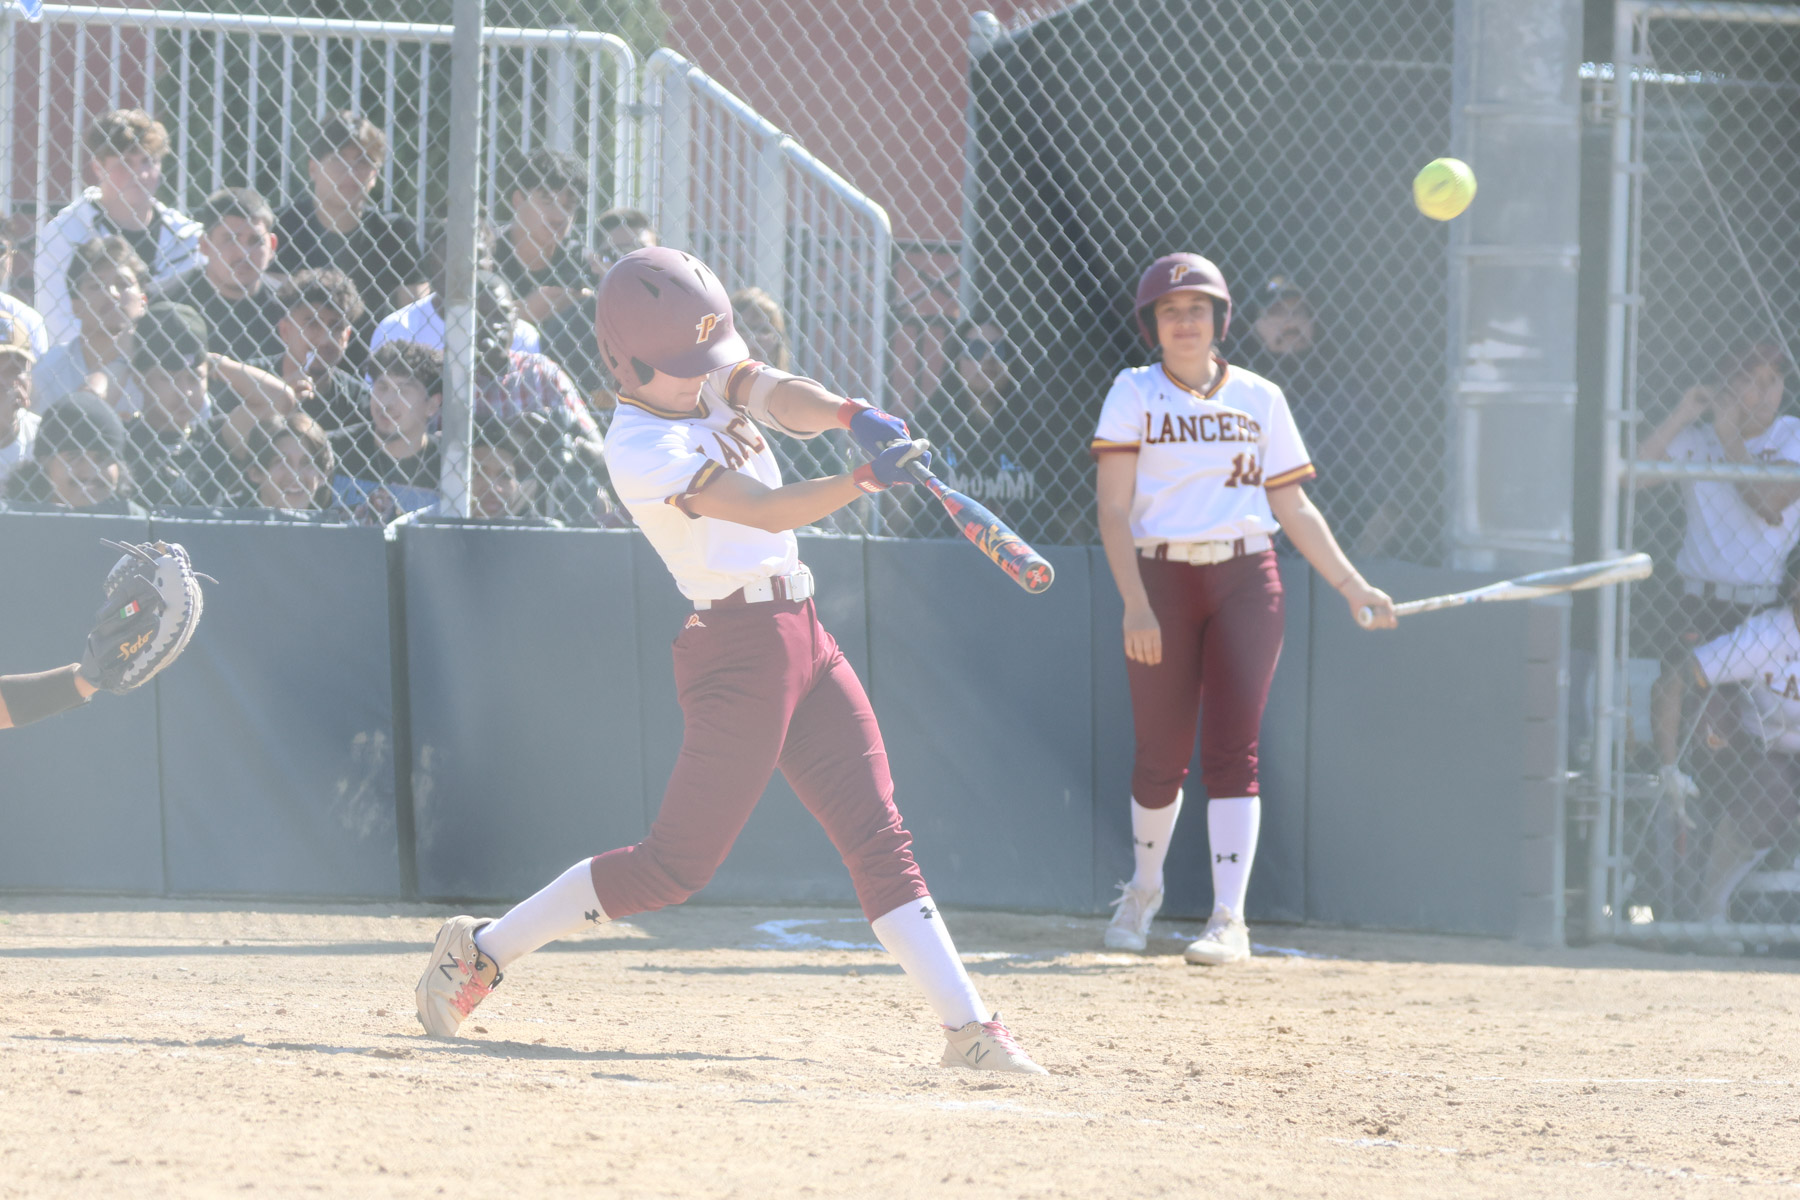 Lucero Alcaraz hits a double during PCC's game on Tuesday (photo by Richard Quinton).